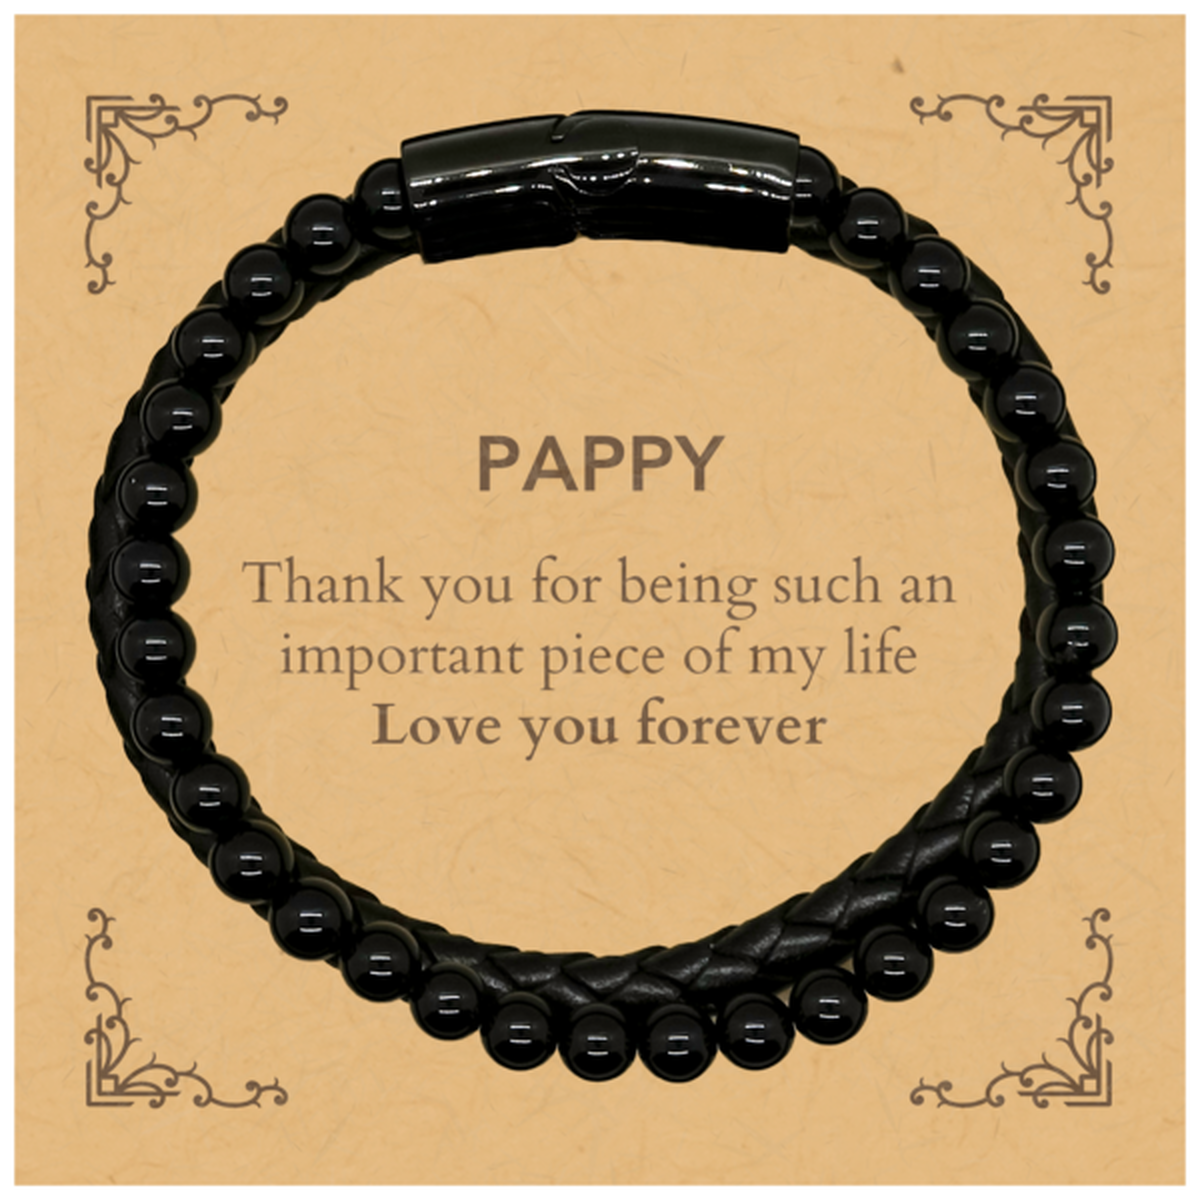 Appropriate Pappy Stone Leather Bracelets Epic Birthday Gifts for Pappy Thank you for being such an important piece of my life Pappy Christmas Mothers Fathers Day